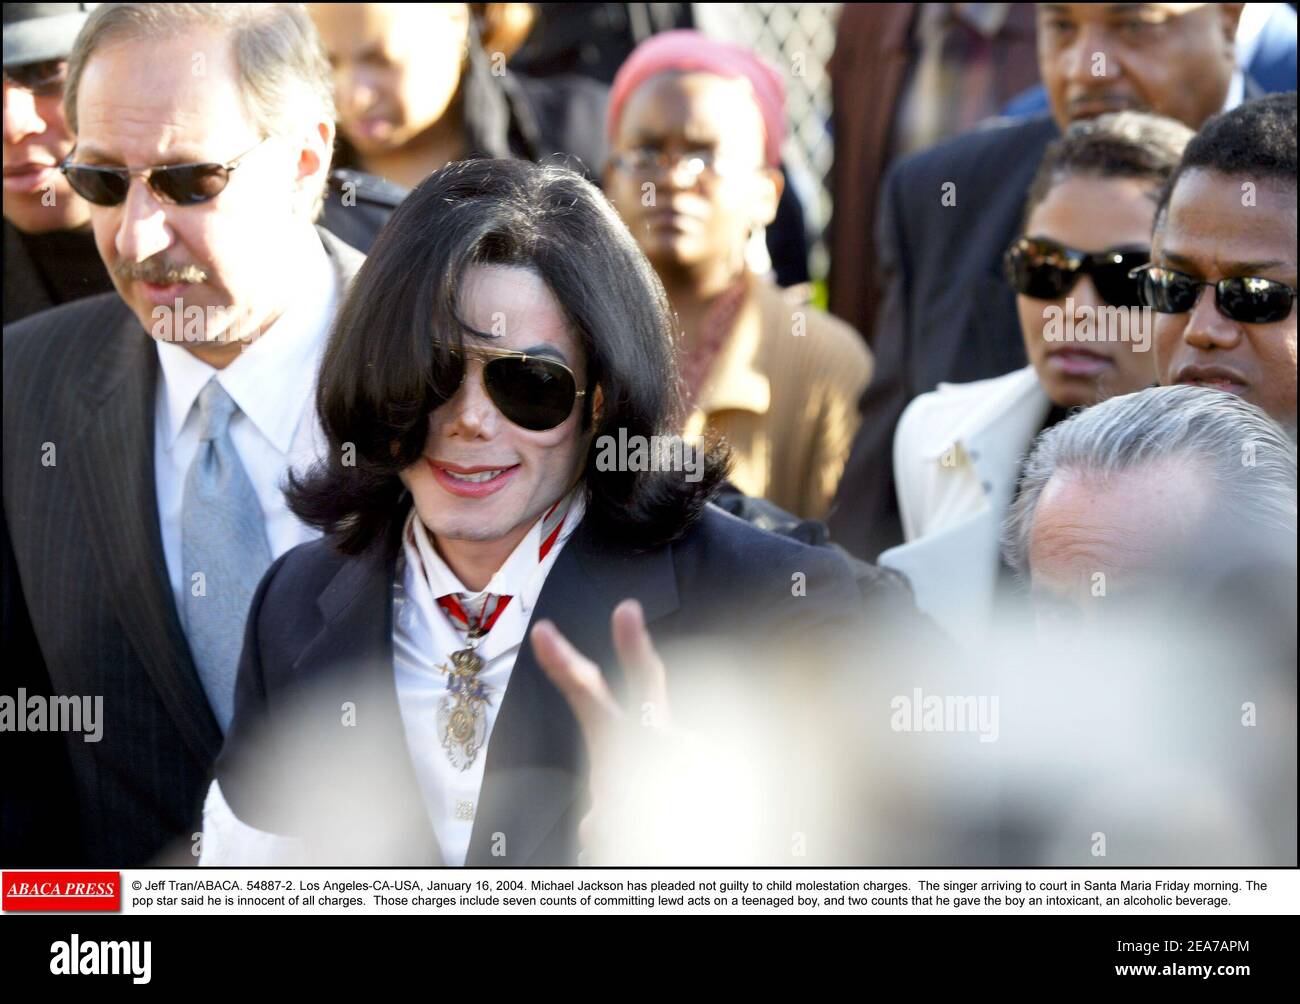 © Jeff Tran/ABACA. 54887-2. Los Angeles-CA-USA, January 16, 2004. Michael Jackson has pleaded not guilty to child molestation charges. The singer arriving to court in Santa Maria Friday morning. The pop star said he is innocent of all charges. Those charges include seven counts of committing lewd acts on a teenaged boy, and two counts that he gave the boy an intoxicant, an alcoholic beverage. Stock Photo